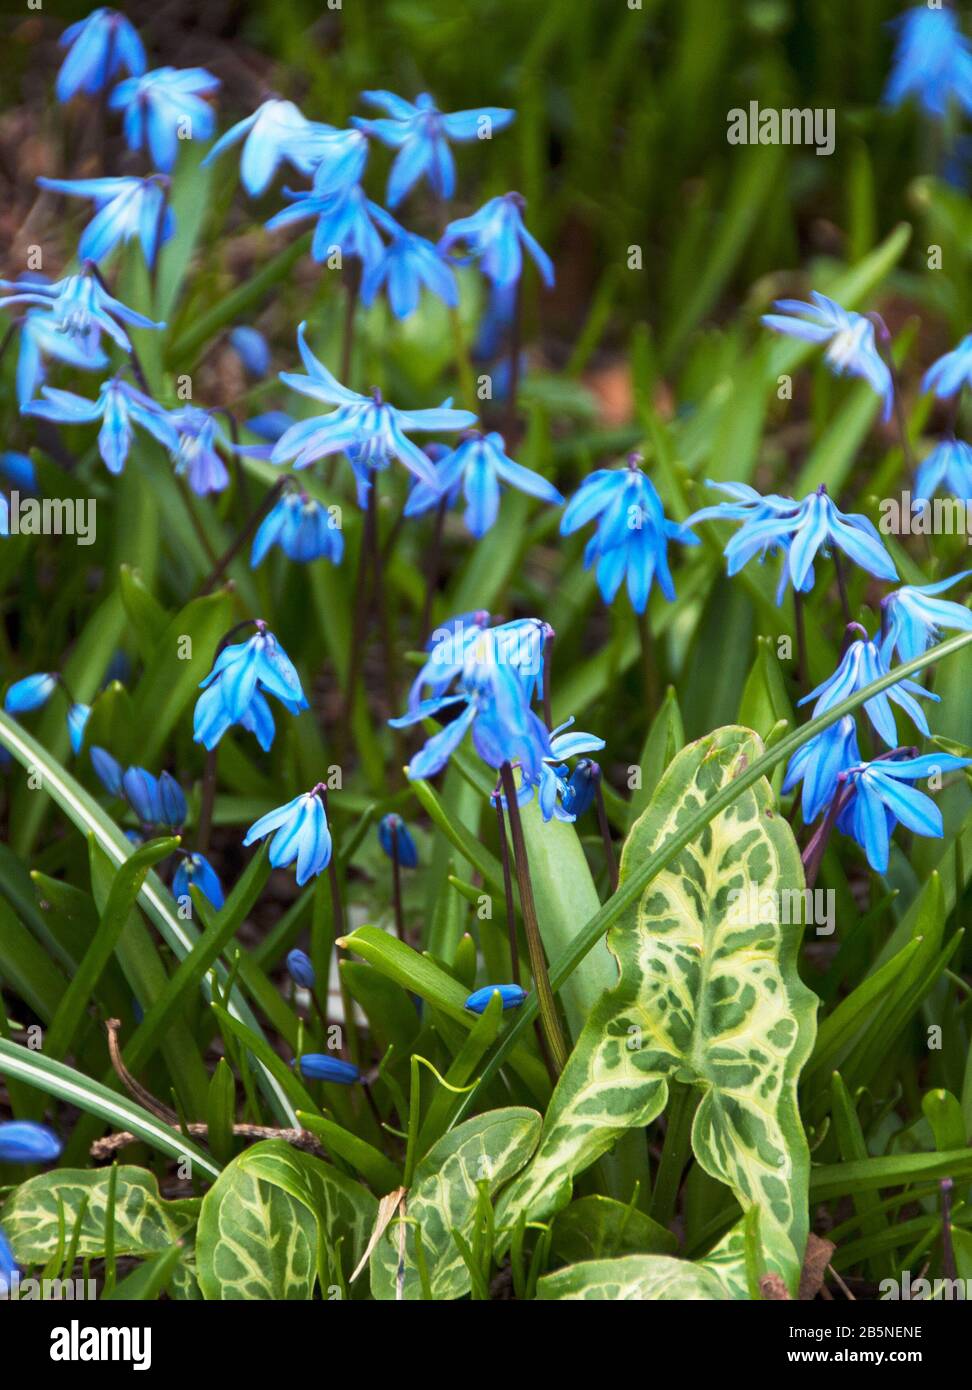 Siberian scilla combine well with variegated Arum italicum leaves Stock Photo